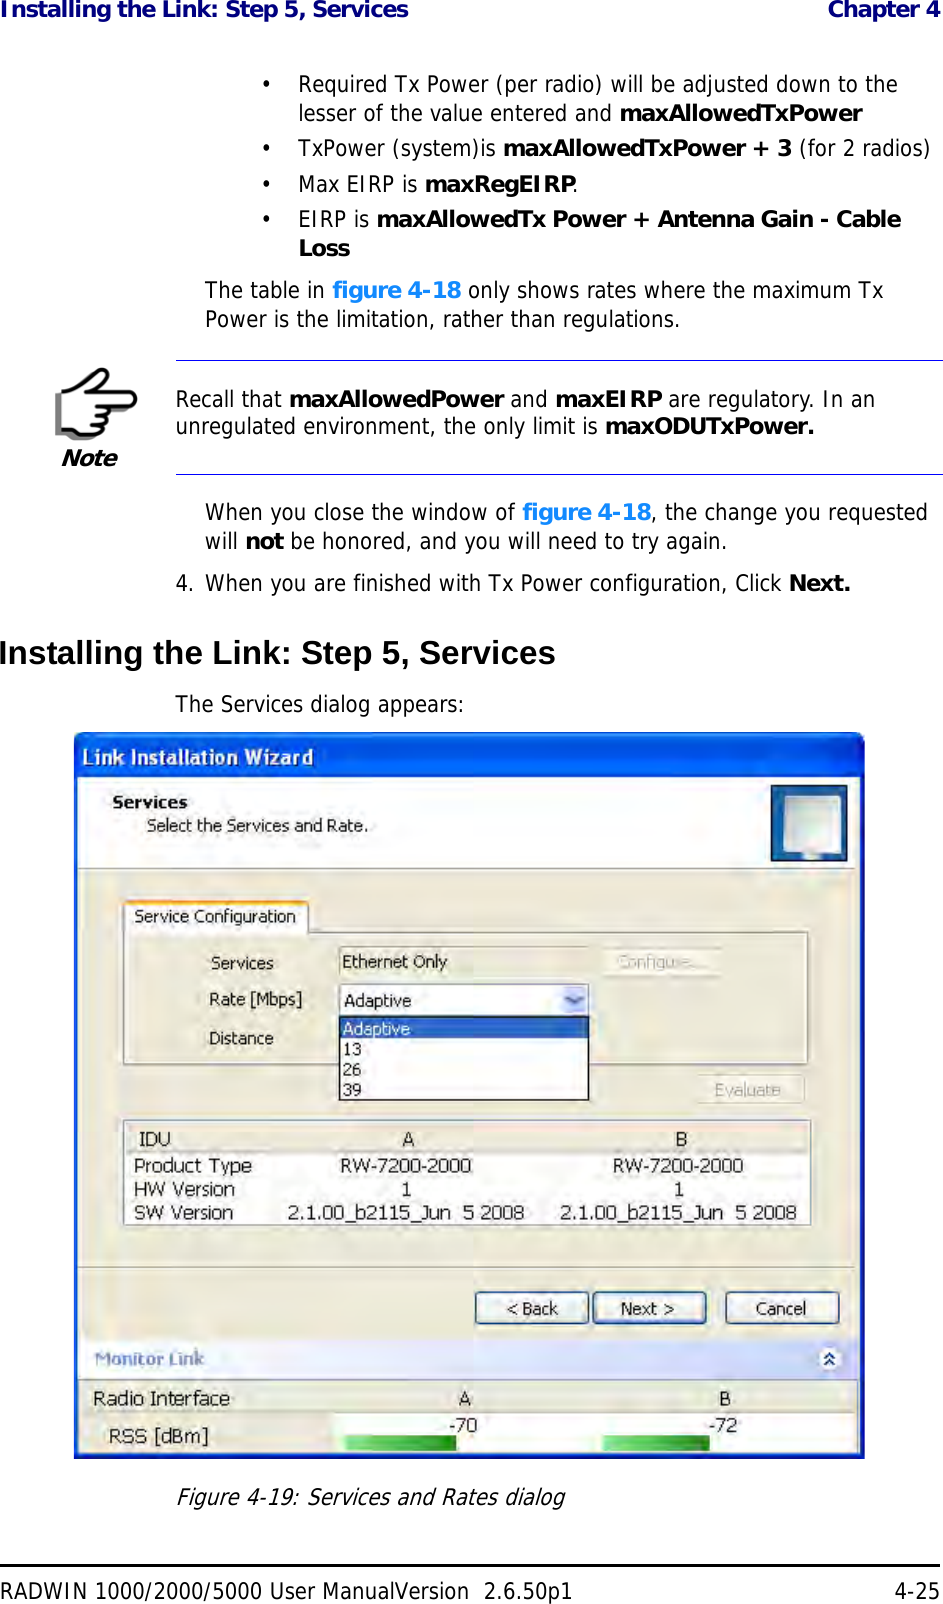 Installing the Link: Step 5, Services  Chapter 4RADWIN 1000/2000/5000 User ManualVersion  2.6.50p1 4-25• Required Tx Power (per radio) will be adjusted down to the lesser of the value entered and maxAllowedTxPower•TxPower (system)is maxAllowedTxPower + 3 (for 2 radios)•Max EIRP is maxRegEIRP.•EIRP is maxAllowedTx Power + Antenna Gain - Cable LossThe table in figure 4-18 only shows rates where the maximum Tx Power is the limitation, rather than regulations.When you close the window of figure 4-18, the change you requested will not be honored, and you will need to try again.4. When you are finished with Tx Power configuration, Click Next.Installing the Link: Step 5, ServicesThe Services dialog appears:Figure 4-19: Services and Rates dialogNoteRecall that maxAllowedPower and maxEIRP are regulatory. In an unregulated environment, the only limit is maxODUTxPower.